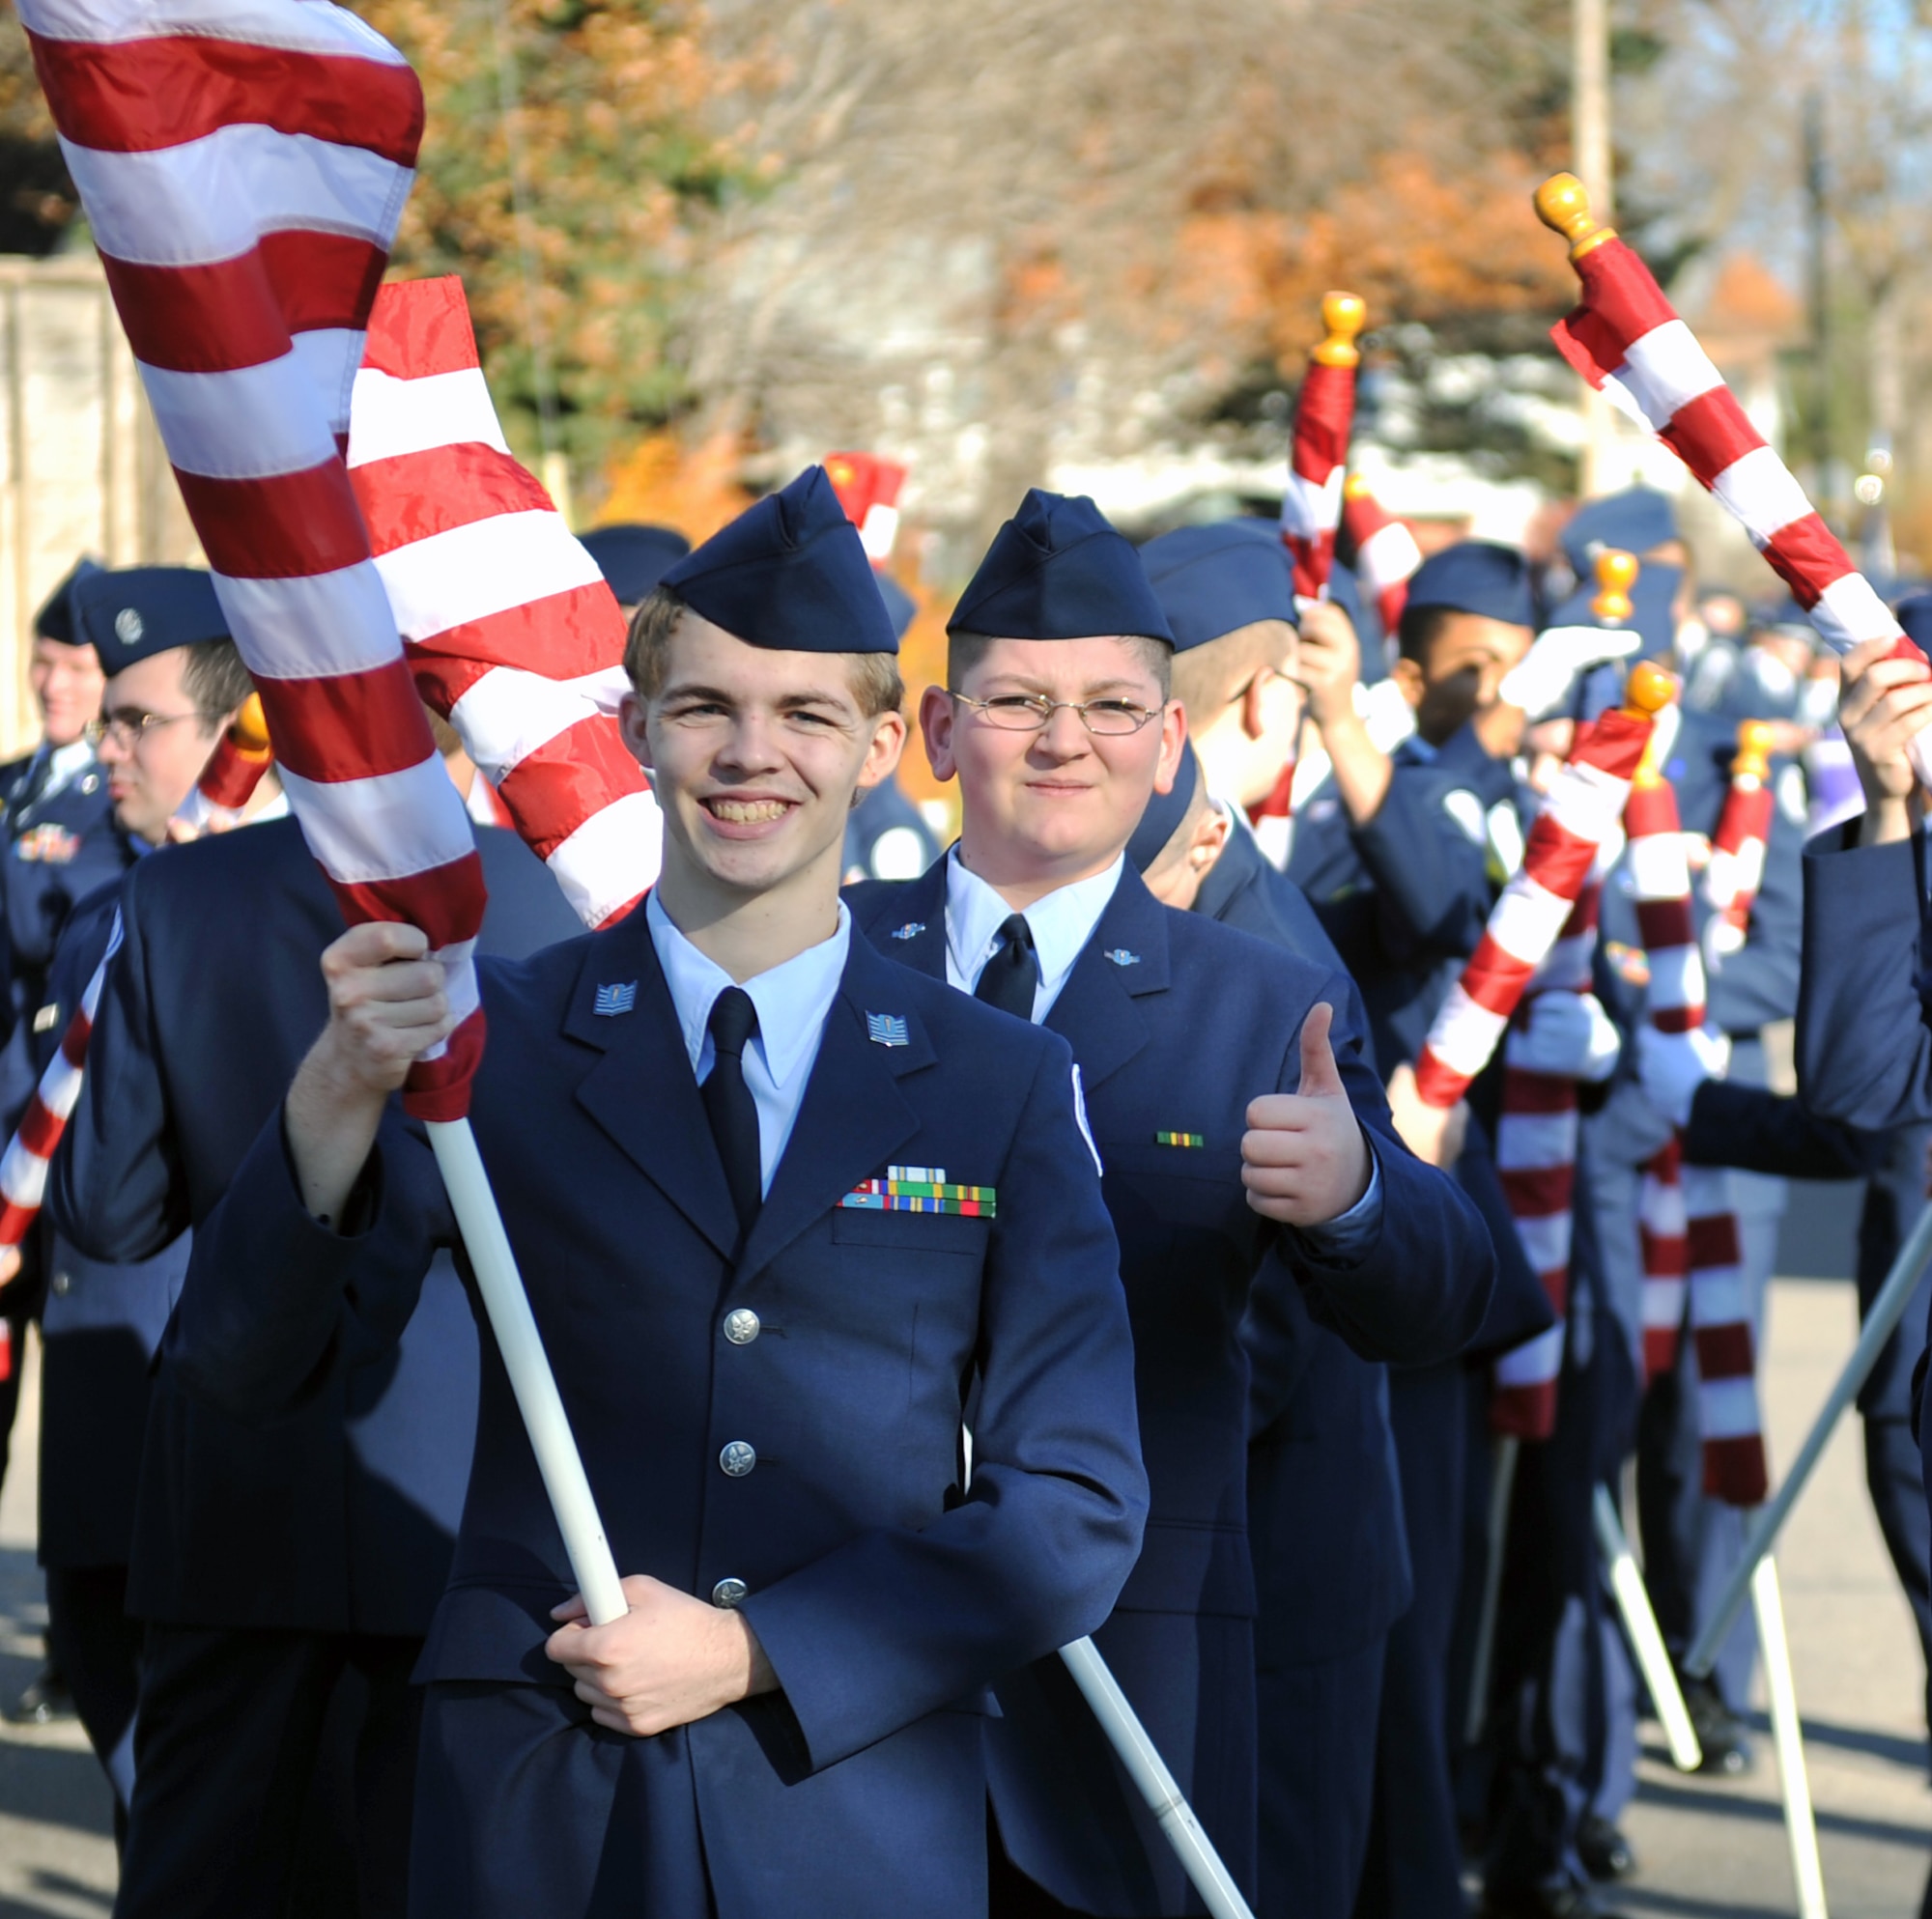 Daniel Smith smiles as Cameron Cattano gives a thumbs-up for the Bellevue East Junior ROTC at the 2012 Veterans Day parade in Bellevue, Neb. Nov. 10. The 55th Wing, U.S. Strategic Command, the Air Force Weather Agency and other base units joined with members of the Bellevue community to honor veterans at this annual parade. (U.S. Air Force photo by Jeff W. Gates/Released)